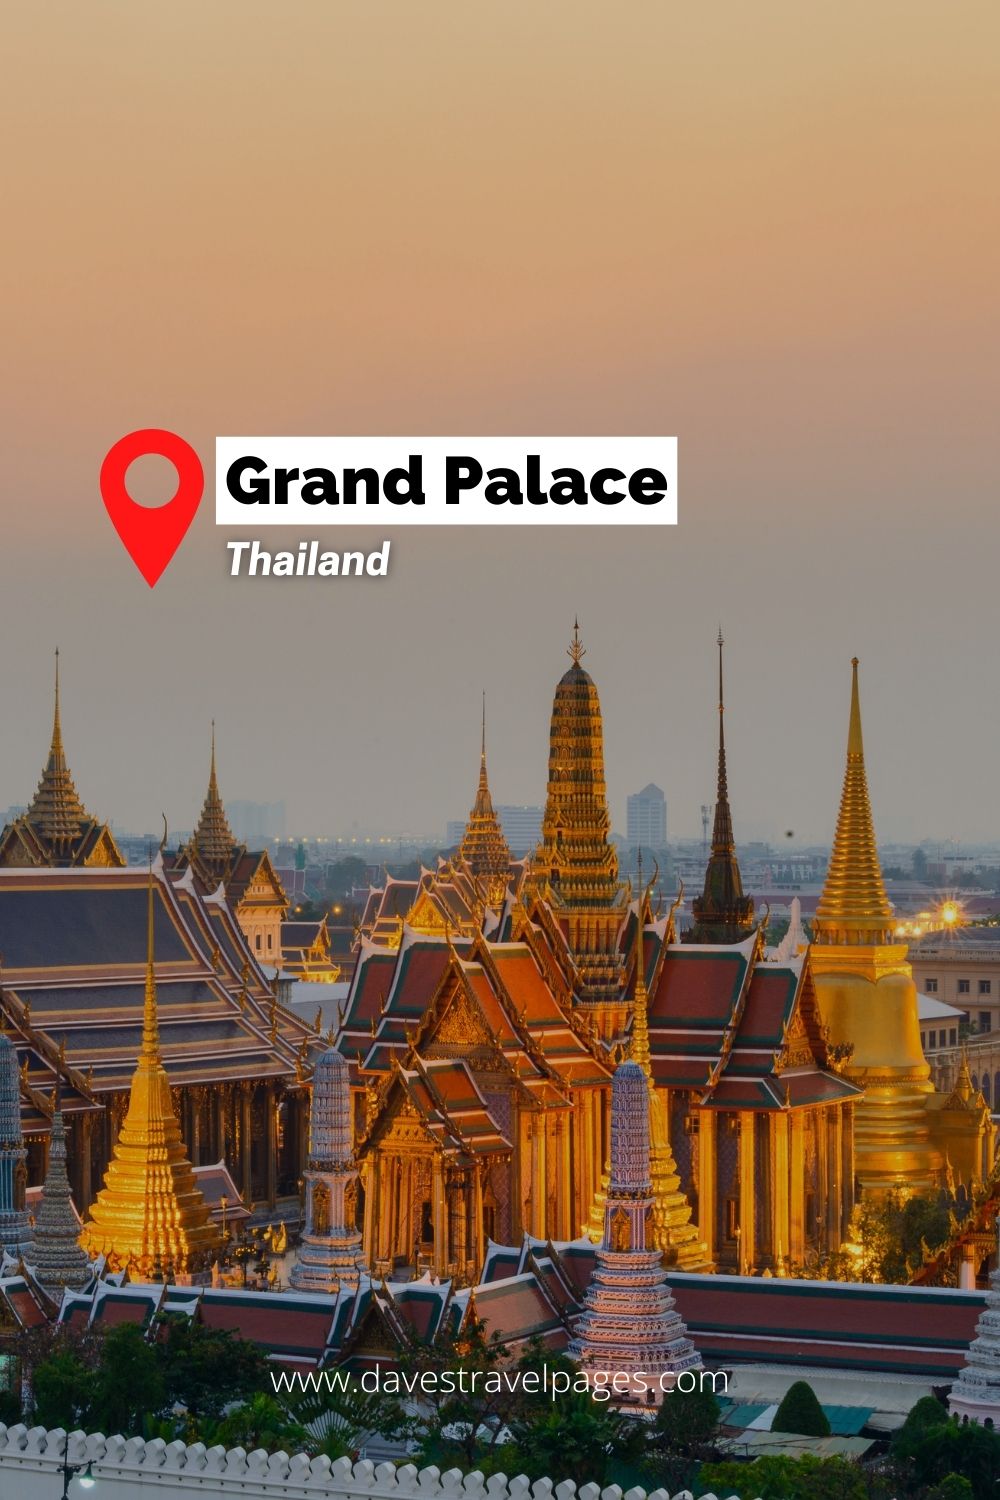 Asian Landmarks: The Grand Palace in Thailand